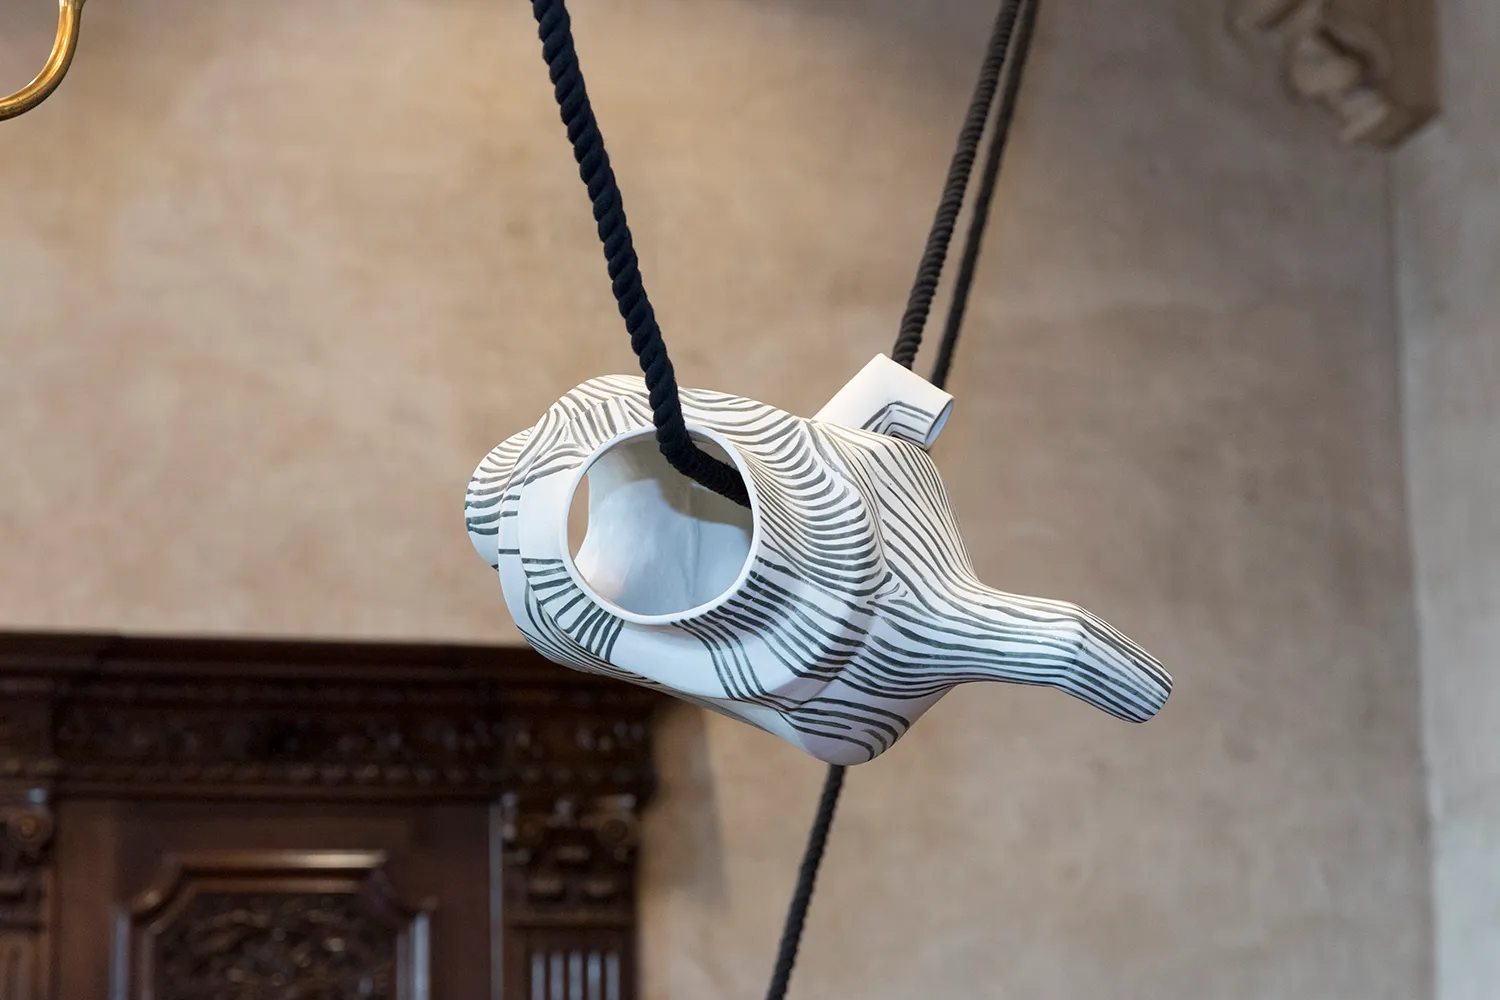 A white ceramic vessel with painted black line, hanging from a black rope